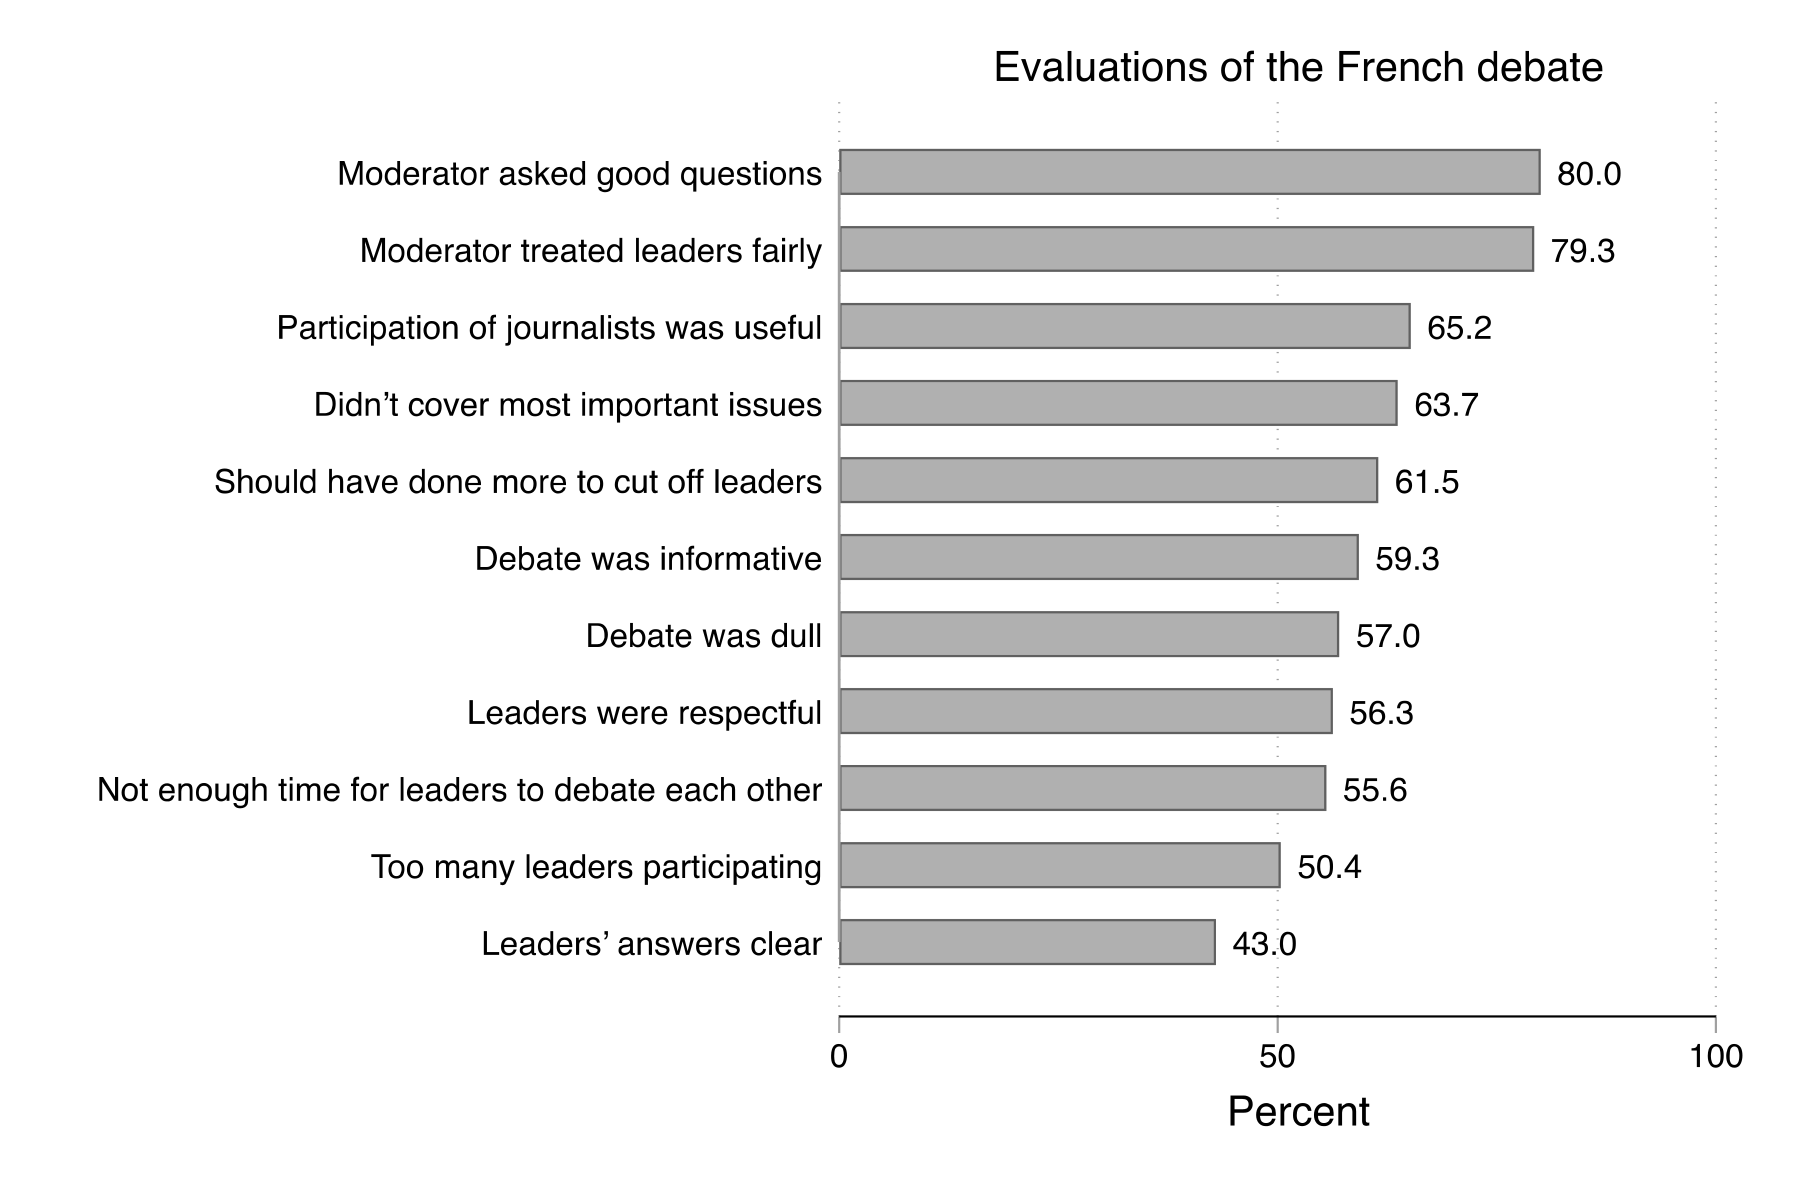 Figure 18. This figure indicates how viewers evaluated the French-language debate. A large majority of viewers thought that the moderator asked good questions and that the moderator treated the leaders fairly. Only 43% of viewers thought that the leaders' answers were clear.